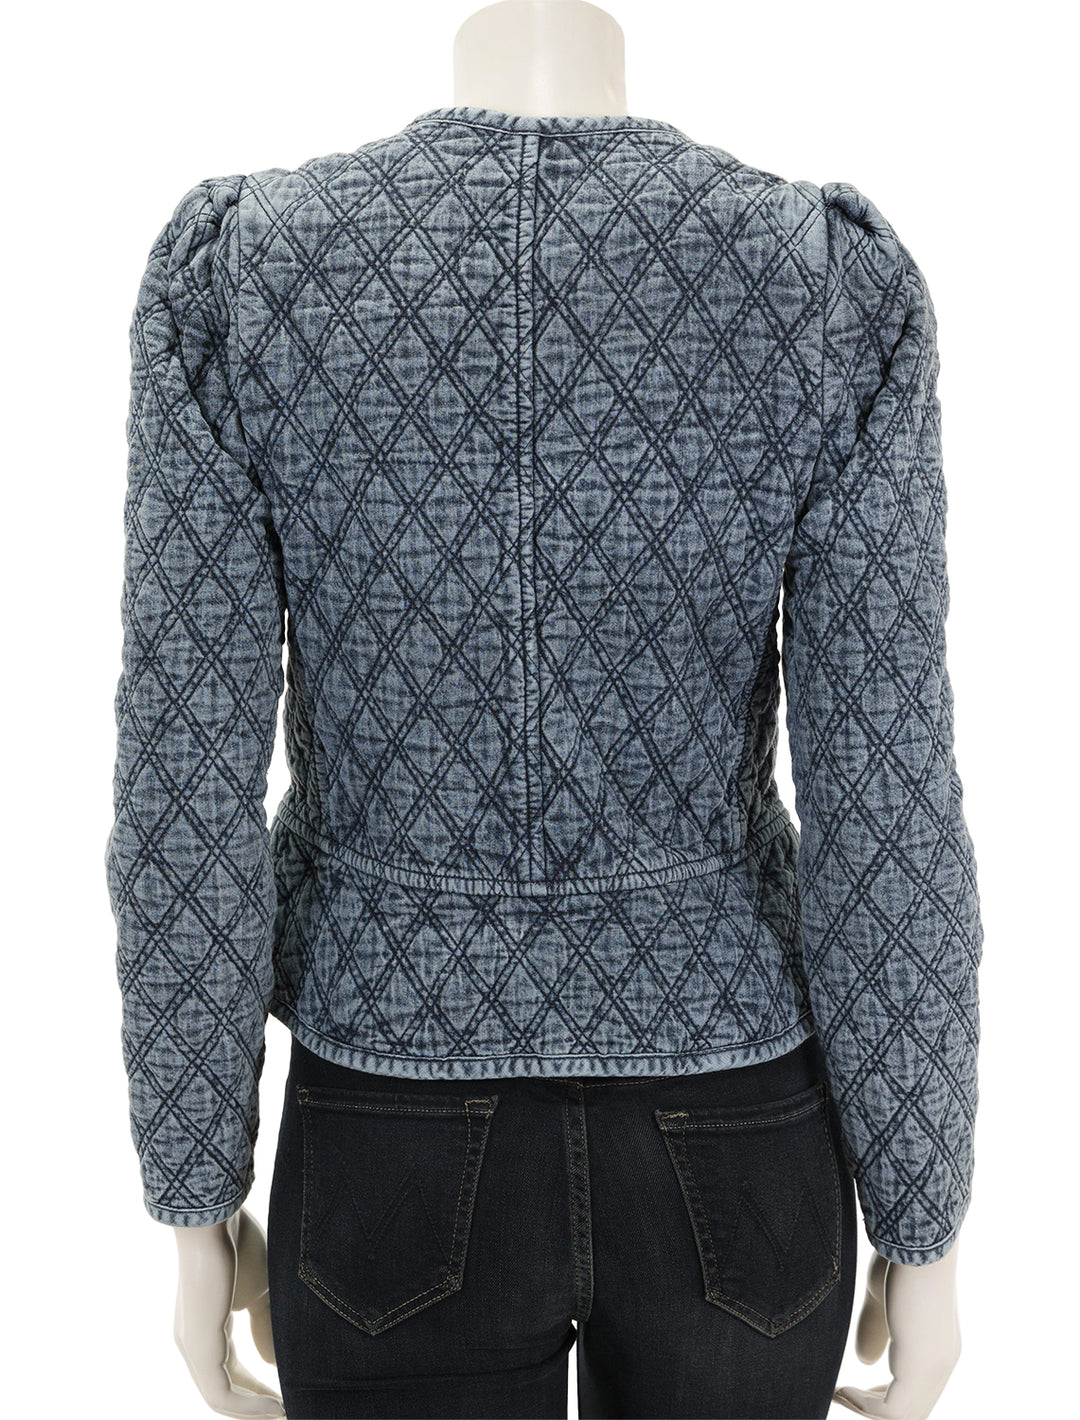 Back view of  Isabel Marant Etoile's deliona jacket in light blue denim quilting.